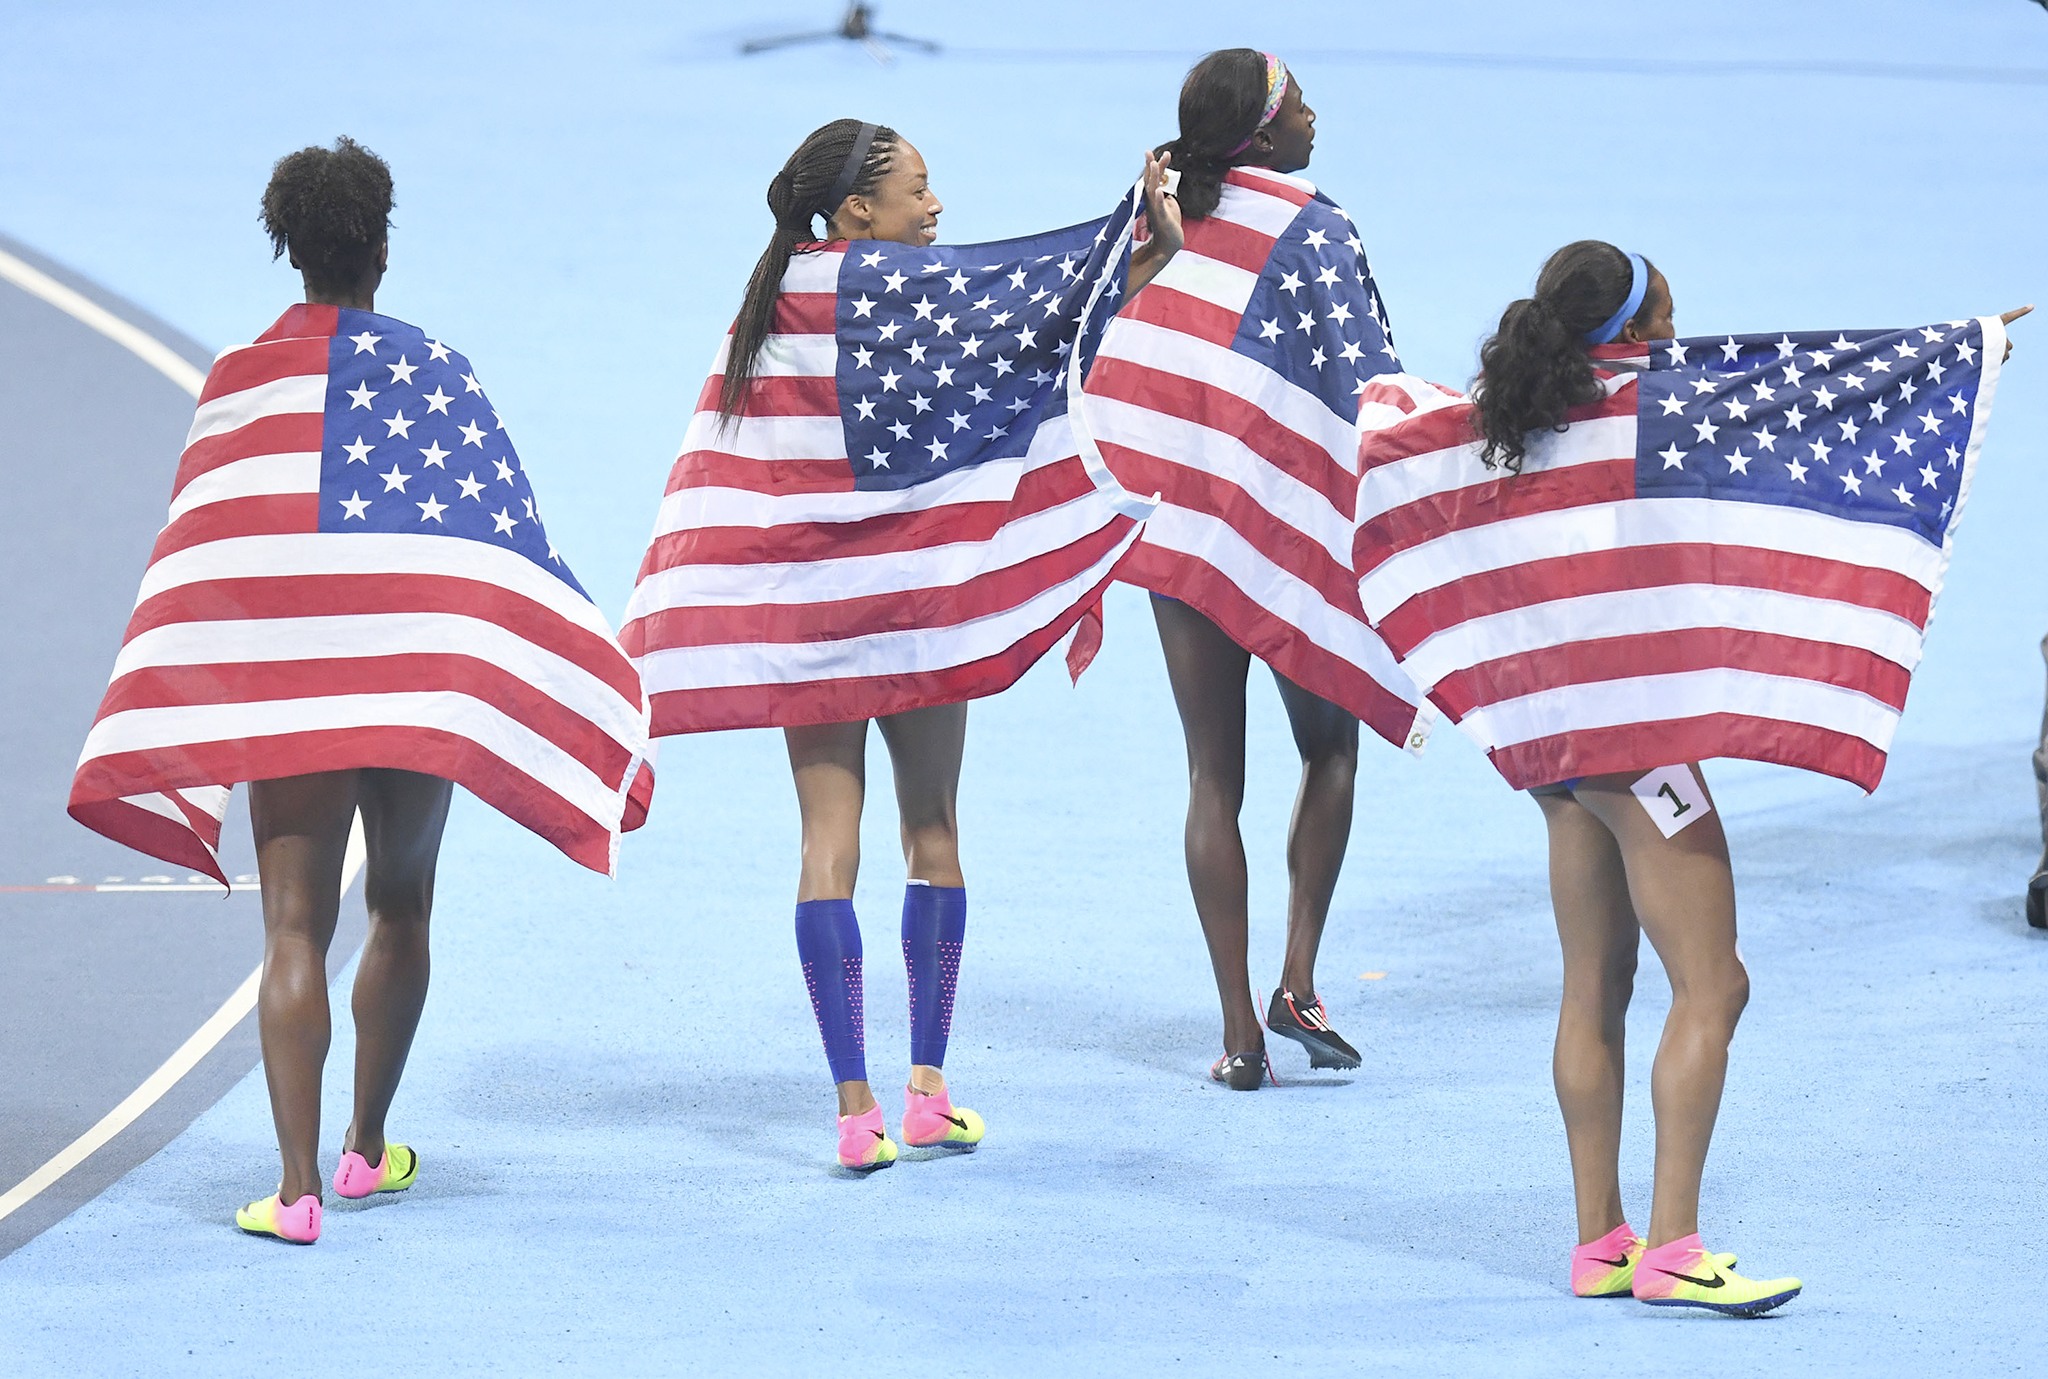 US women top Jamaica for 4x100 relay gold a day after appearing not to advance